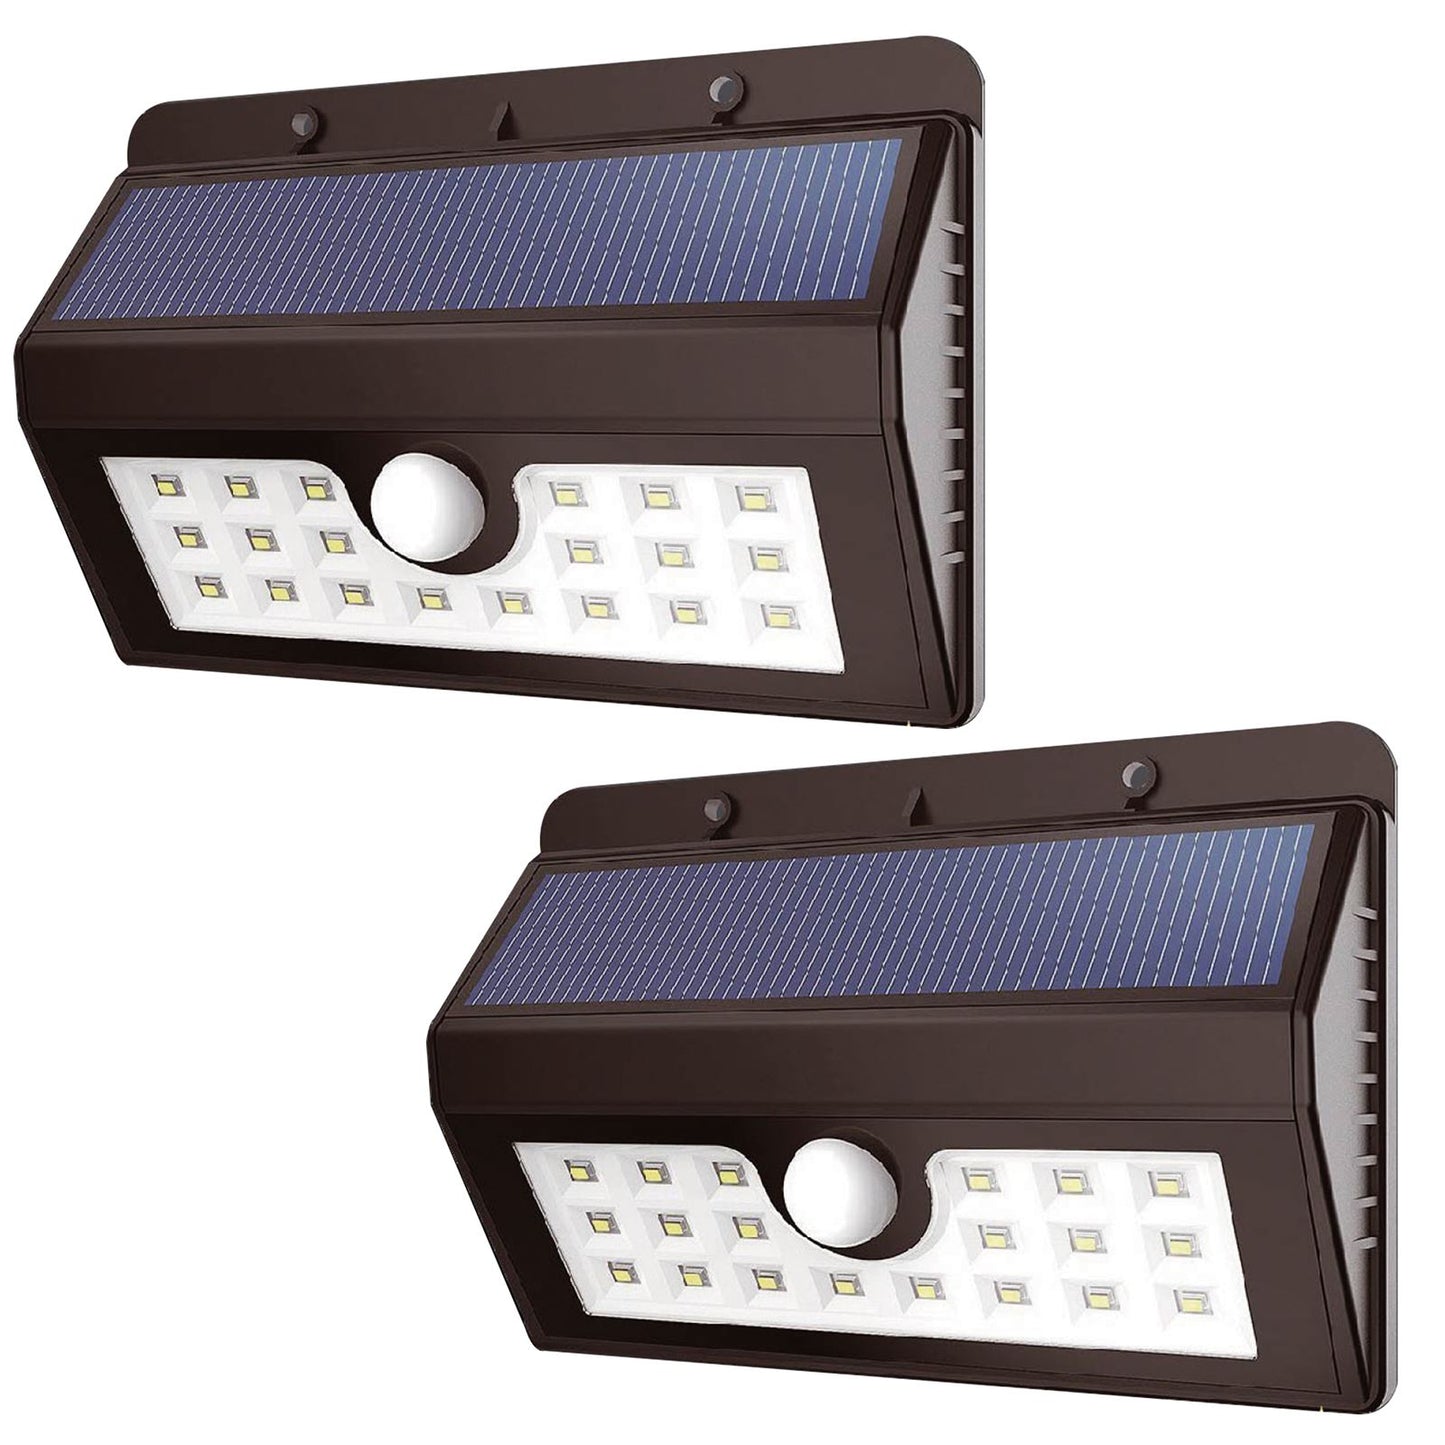 Light Up Your Night with 20 LED Solar Power Light